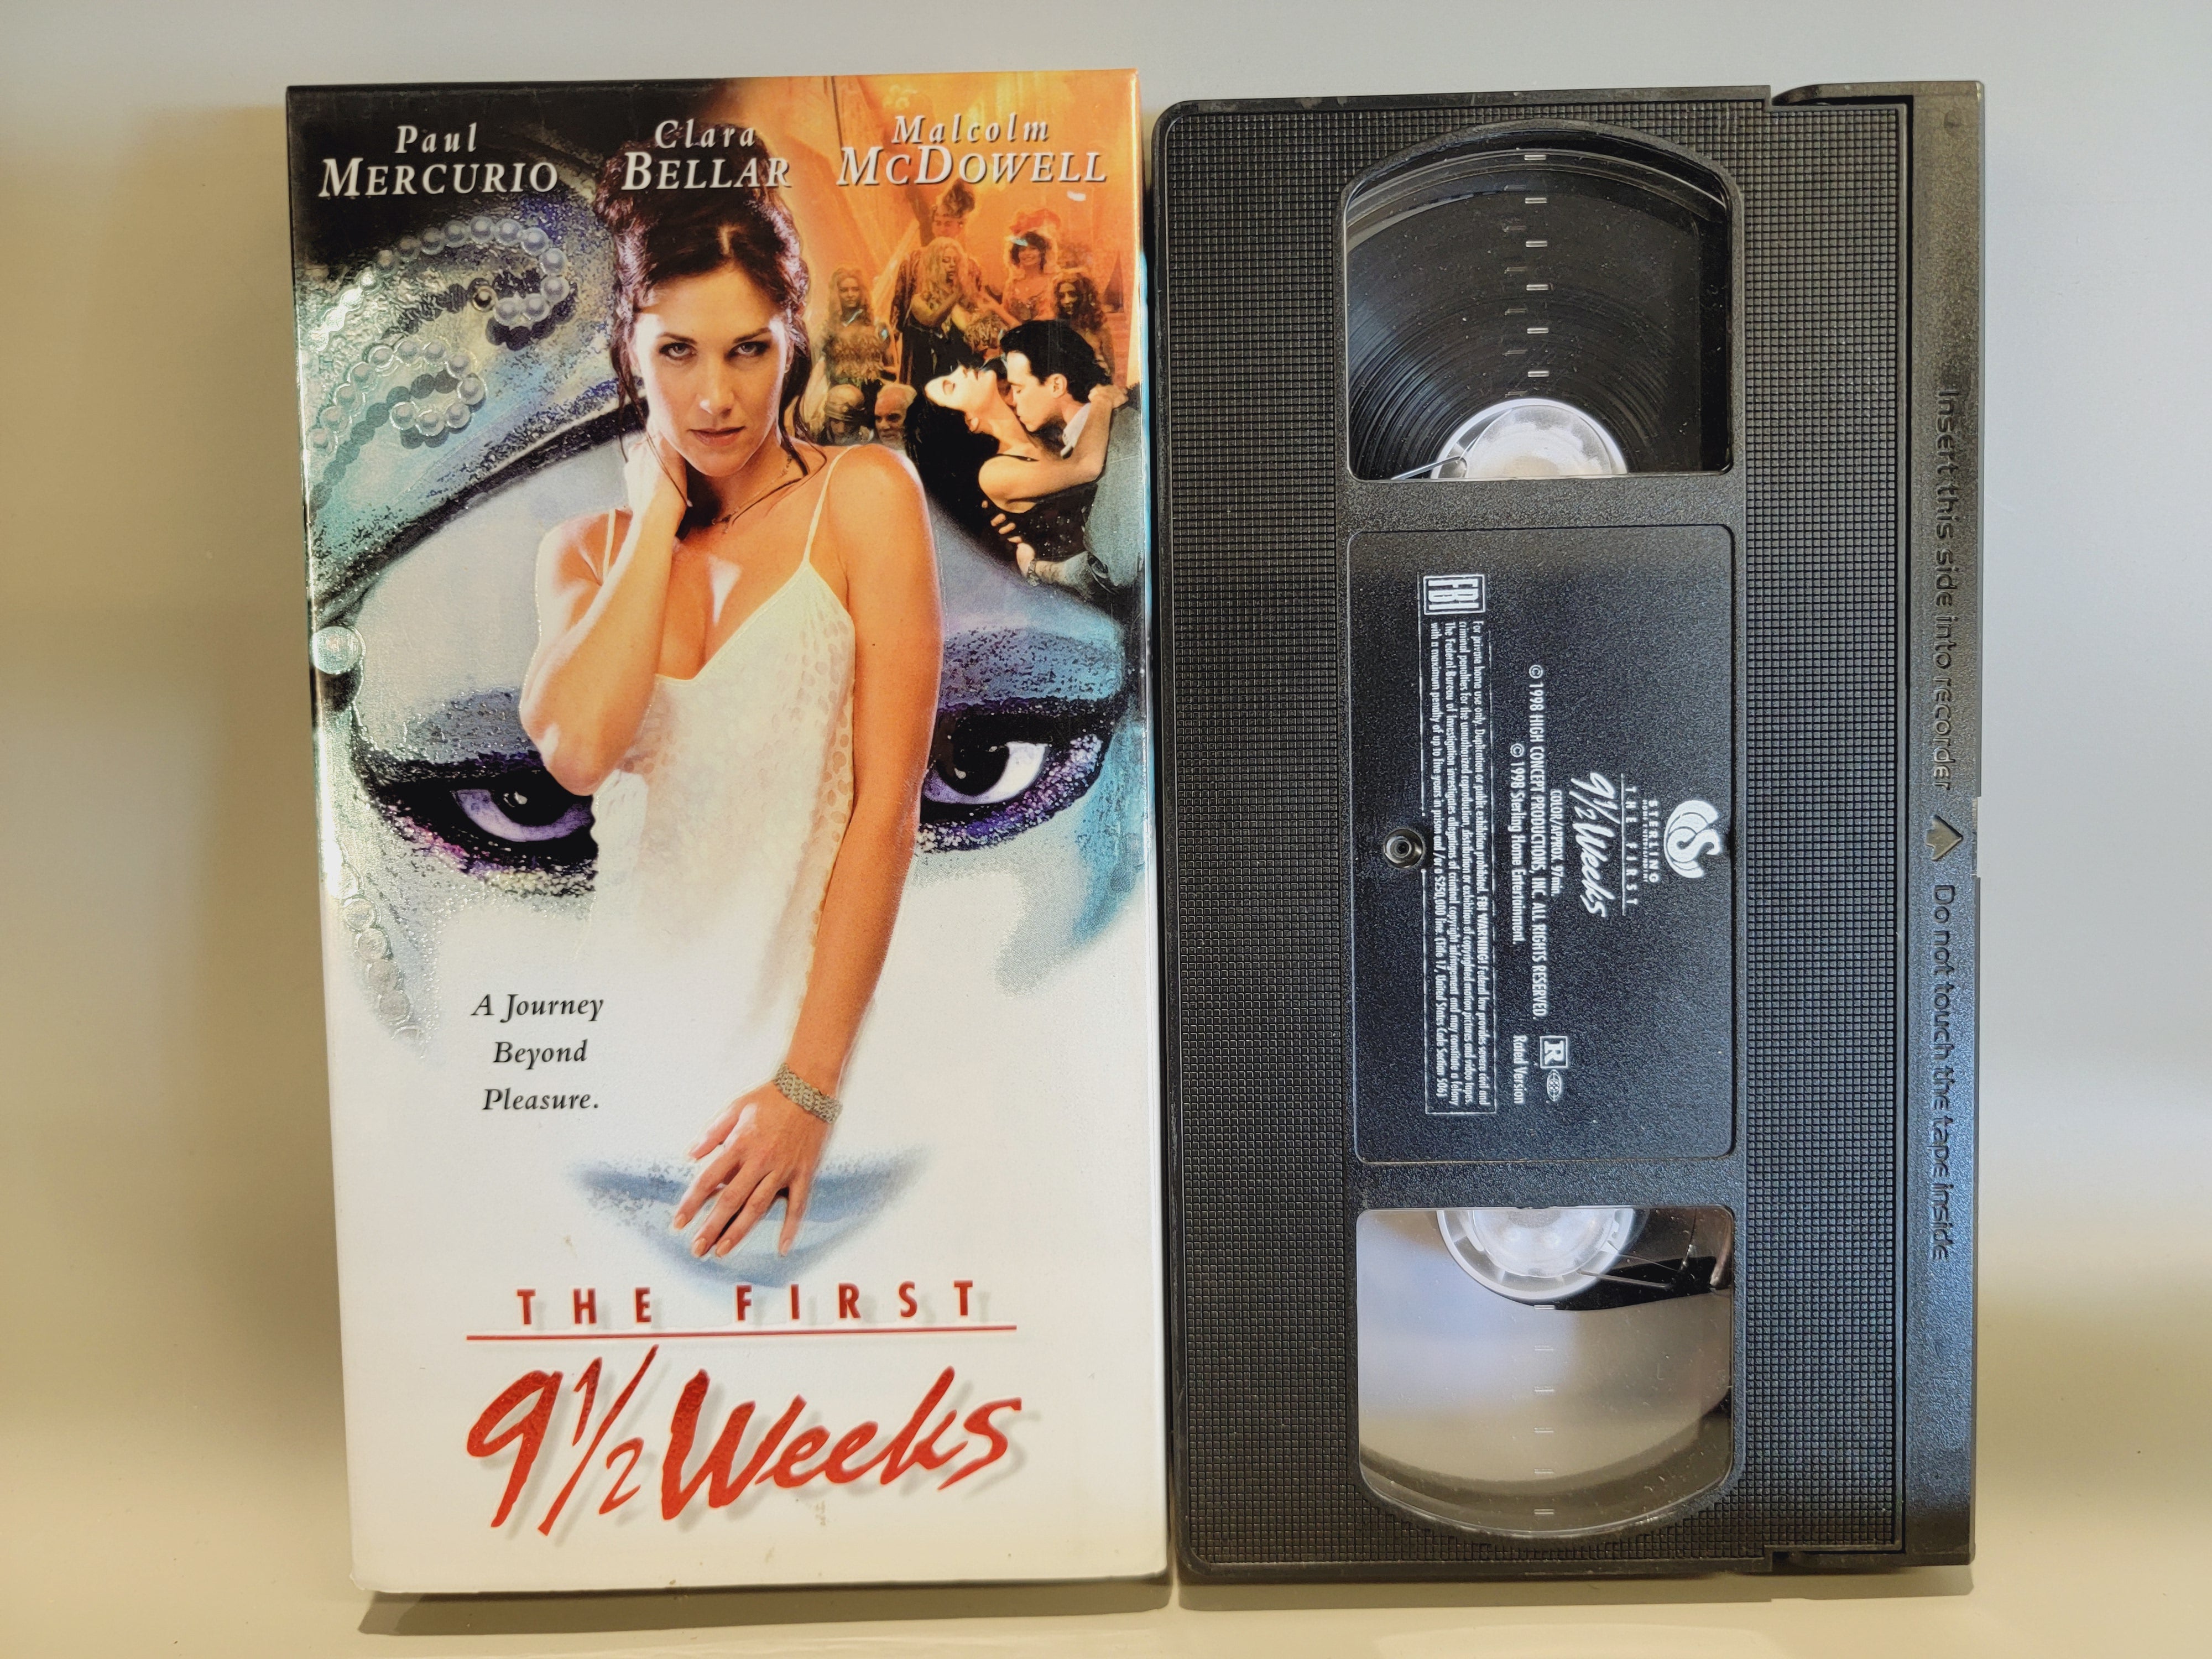 THE FIRST 9 1/2 WEEKS VHS [USED]